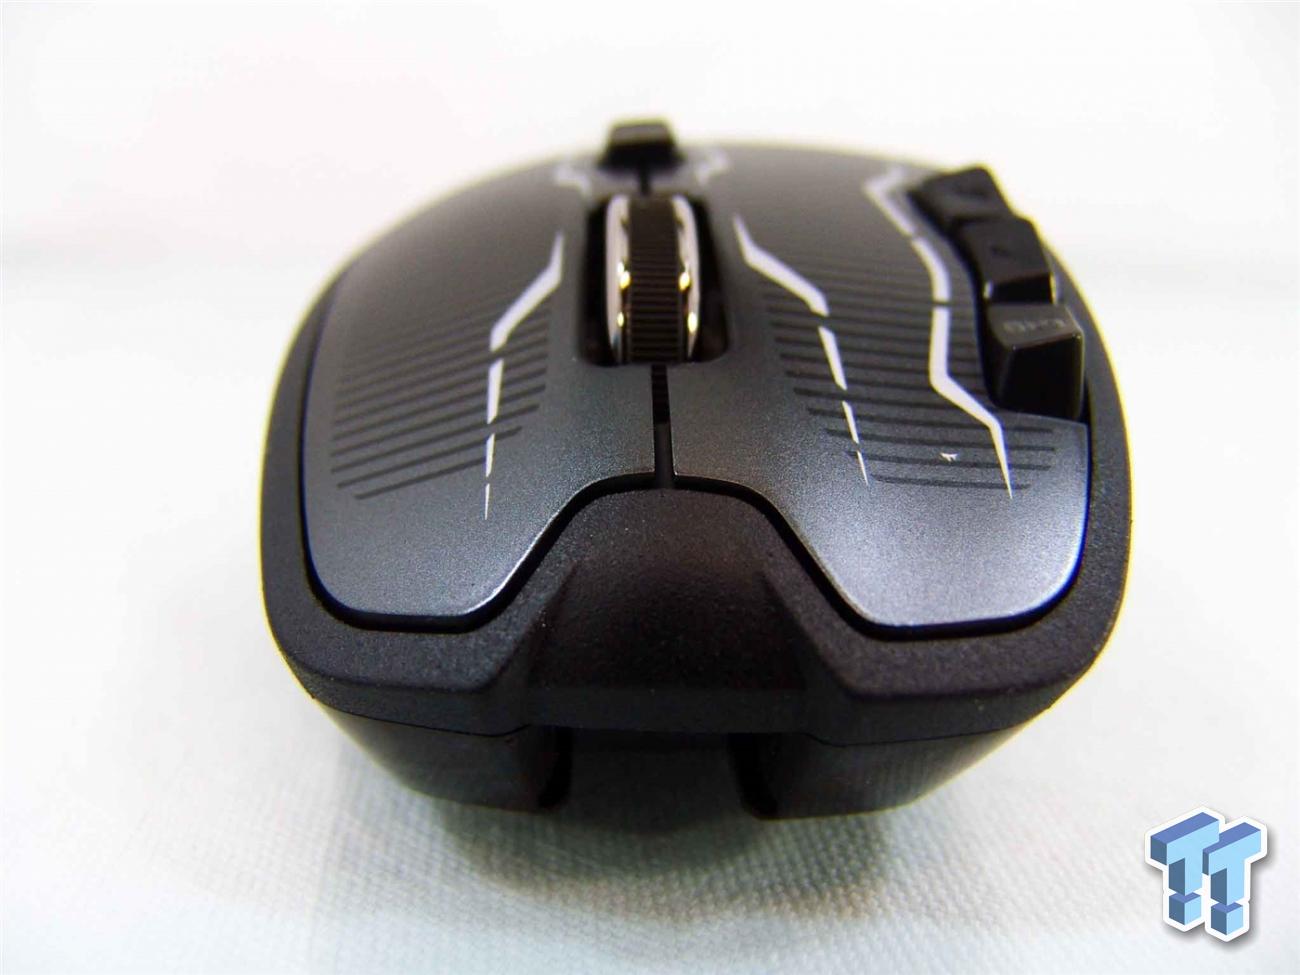 Logitech G700s Rechargeable Gaming Mouse Review | TweakTown